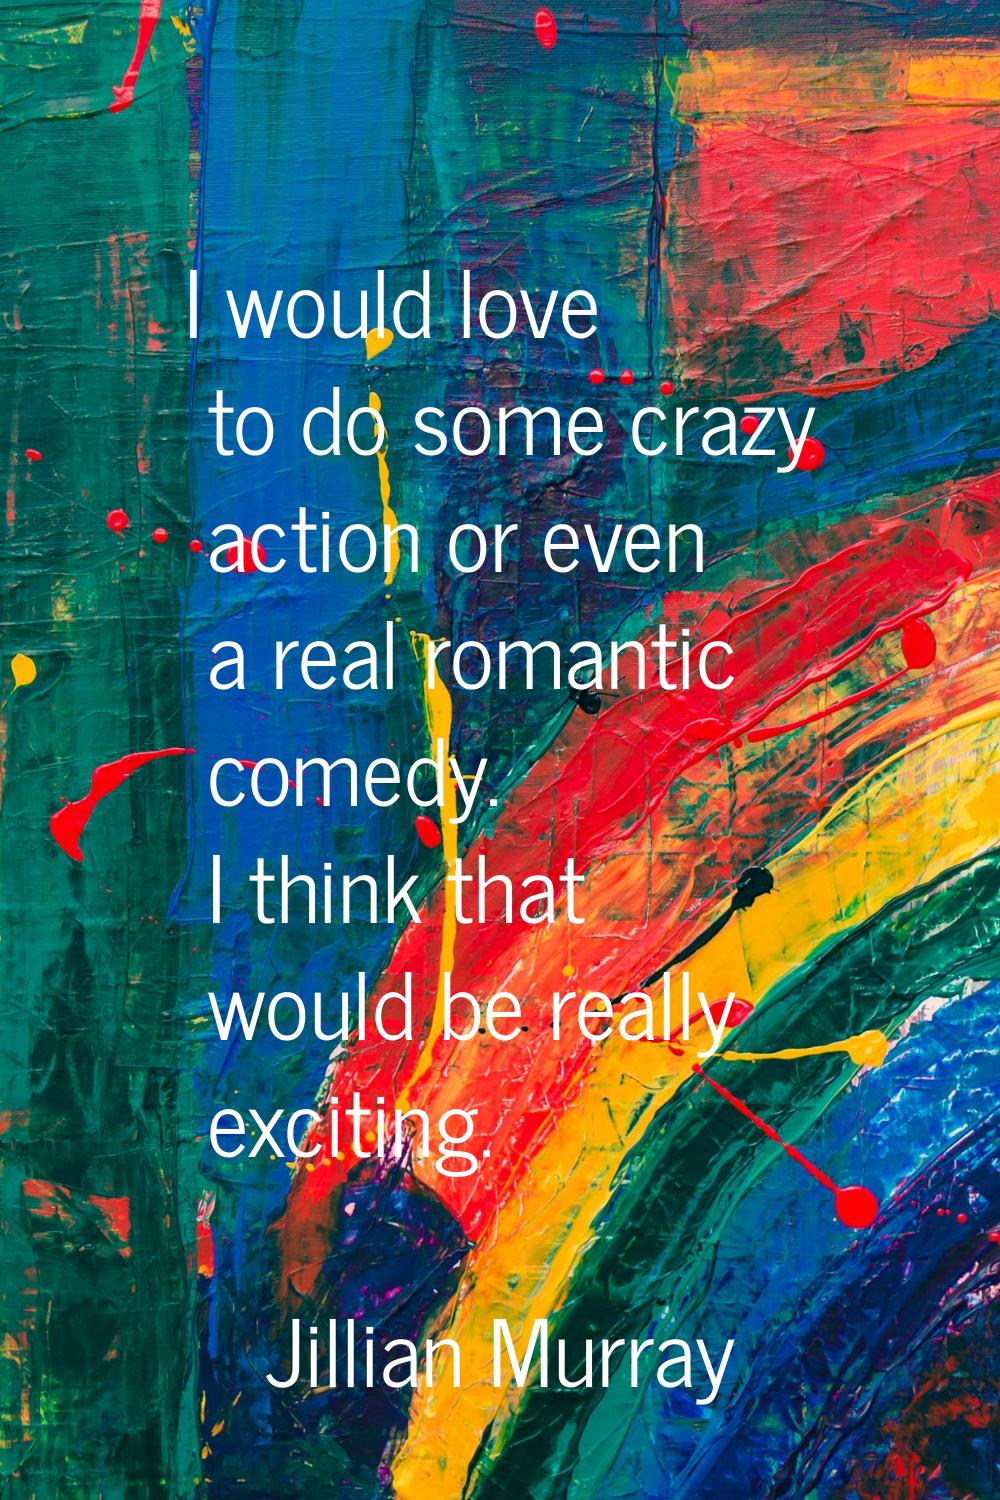 I would love to do some crazy action or even a real romantic comedy. I think that would be really e